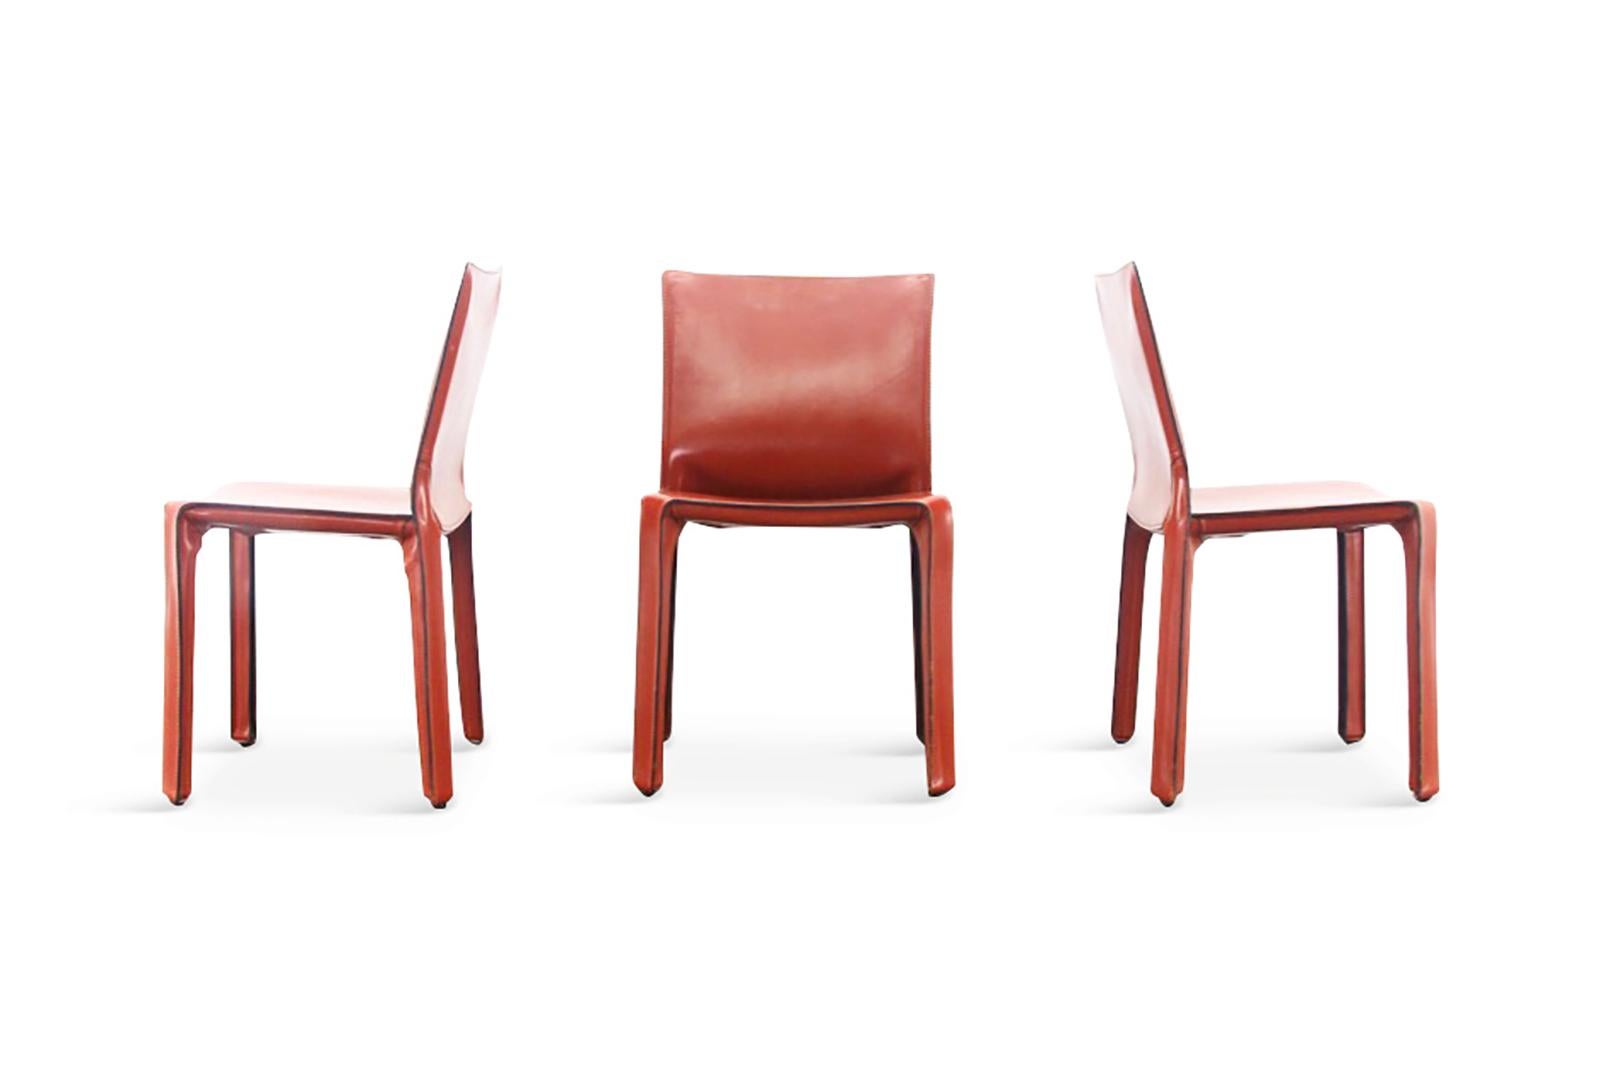 Late 20th Century Mario Bellini Cab Chairs in Oxblood Red Leather for Cassina, 1977